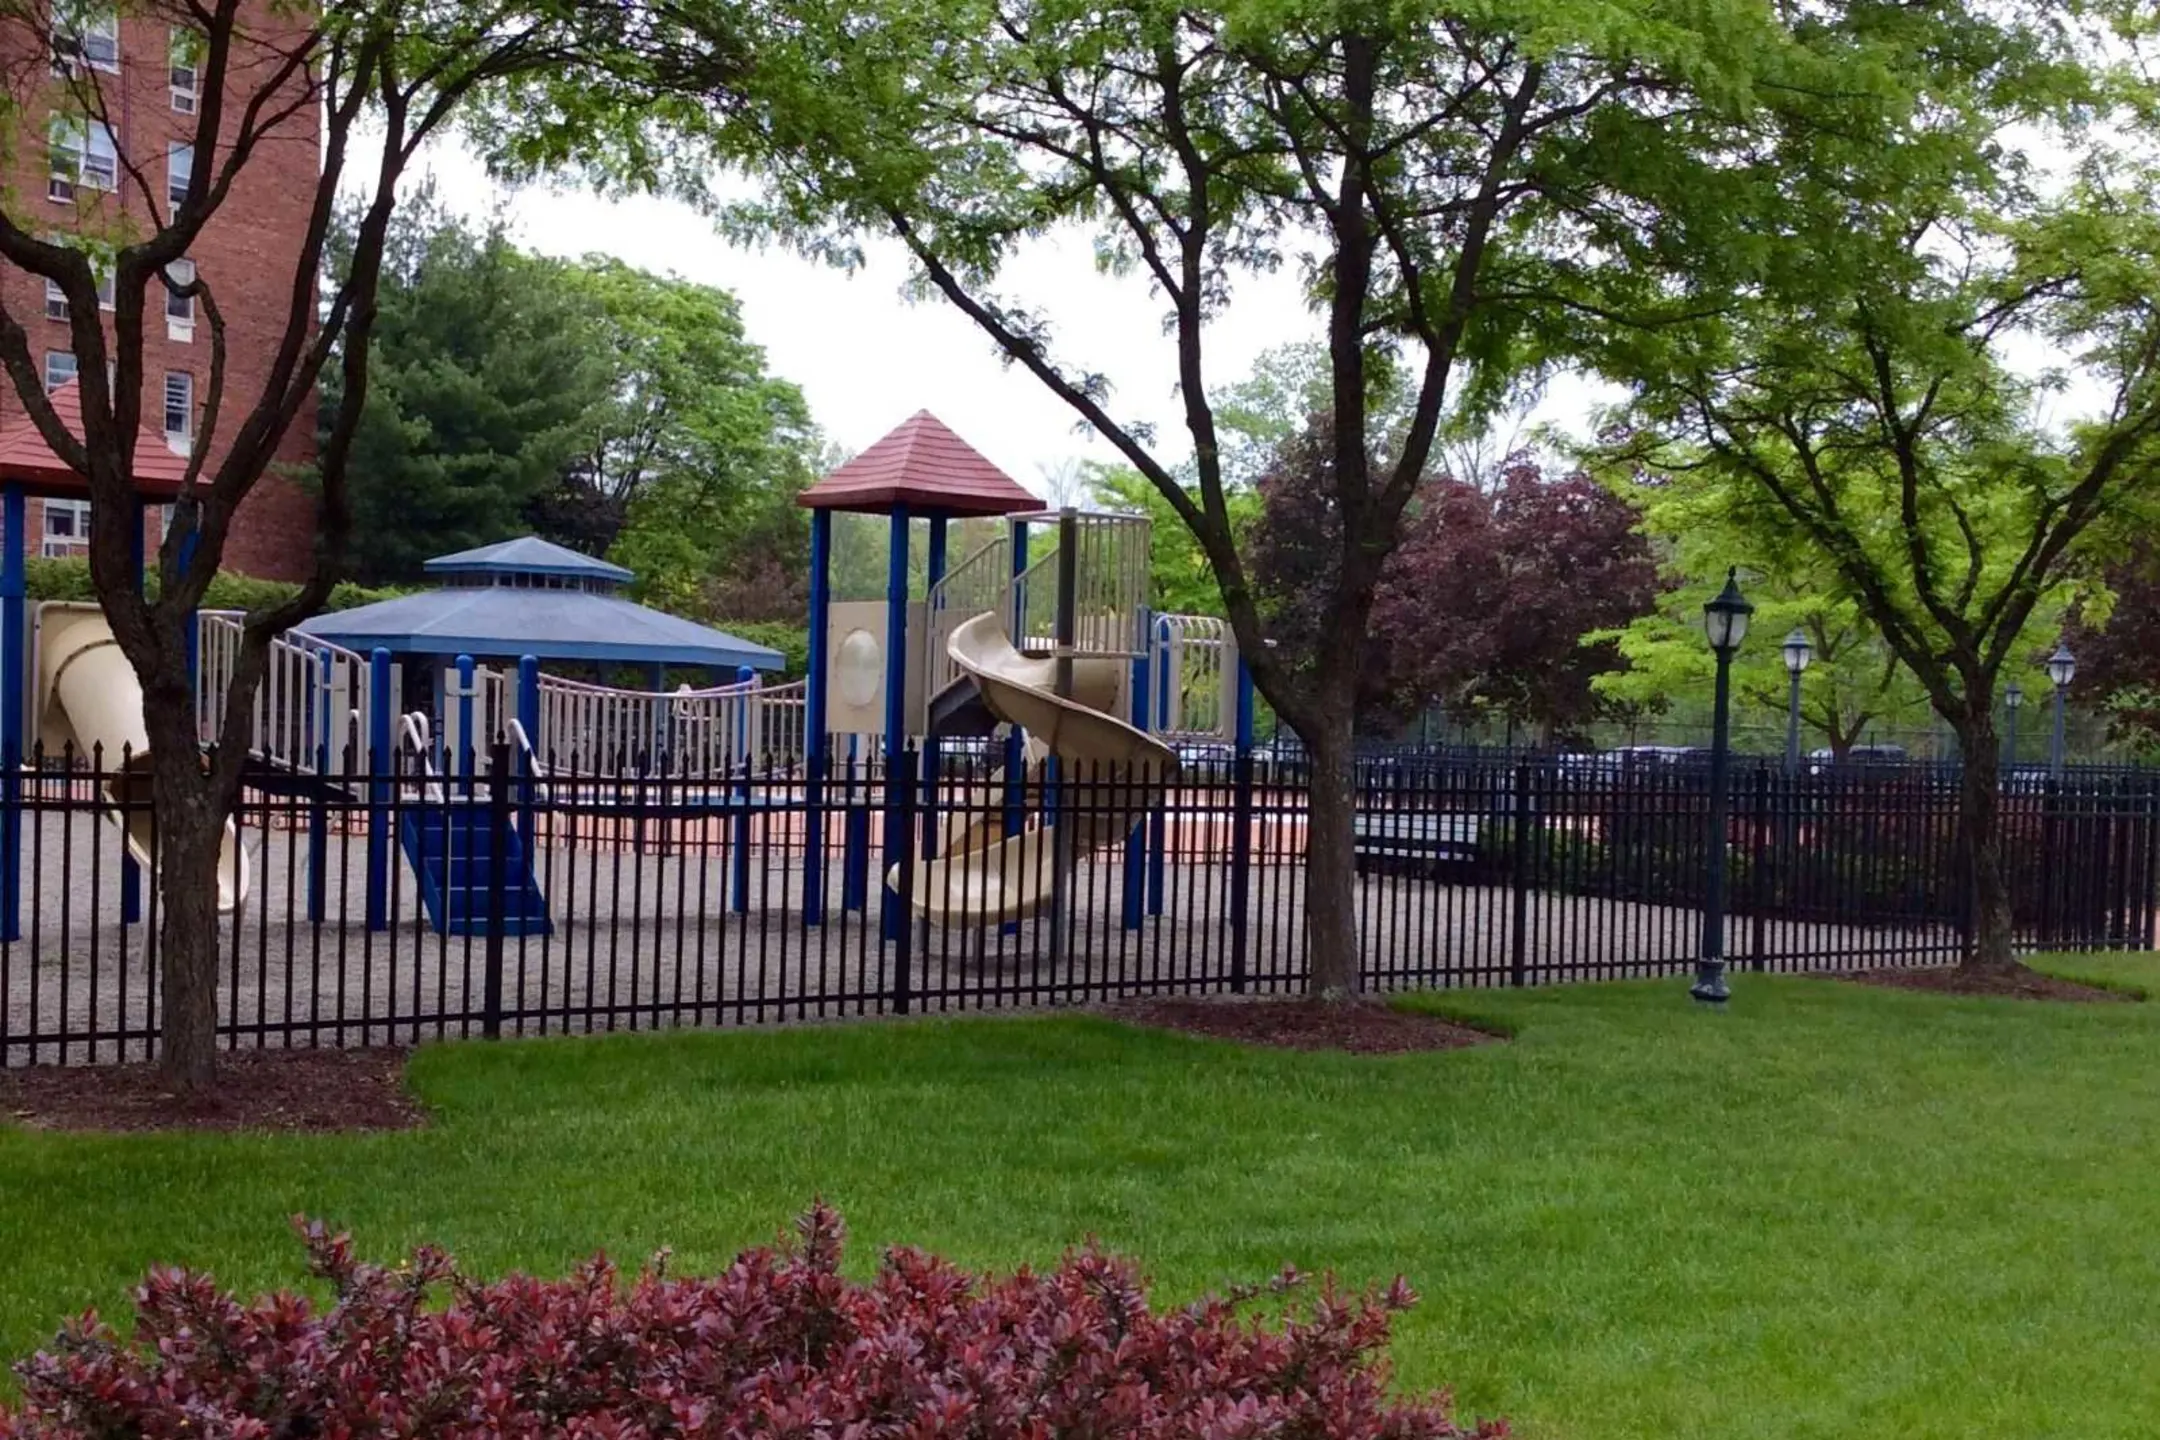 Playground - Imperial Gardens - Wappingers Falls, NY